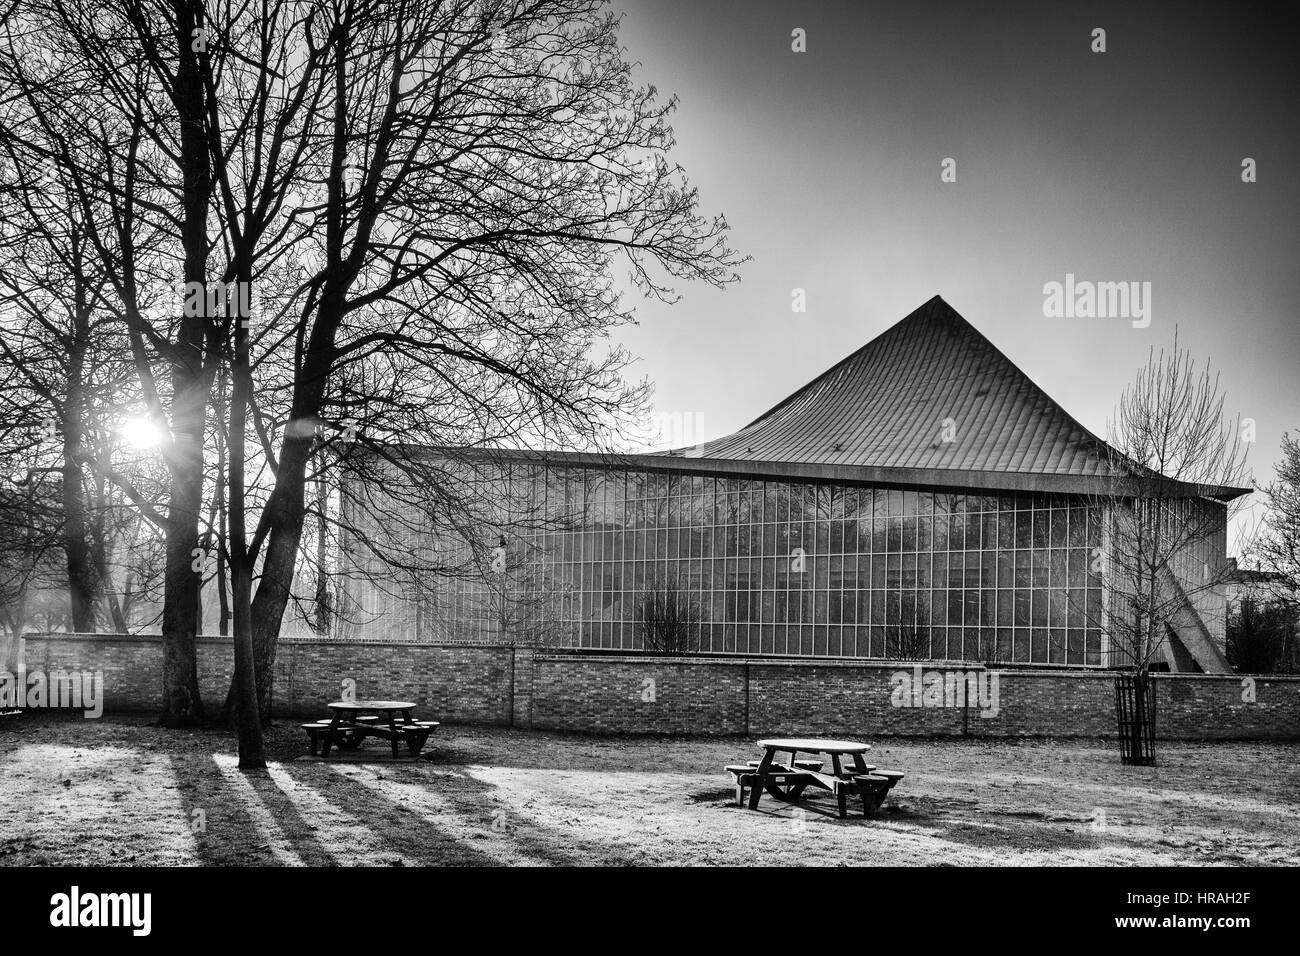 London holland Black and White Stock Photos & Images - Alamy